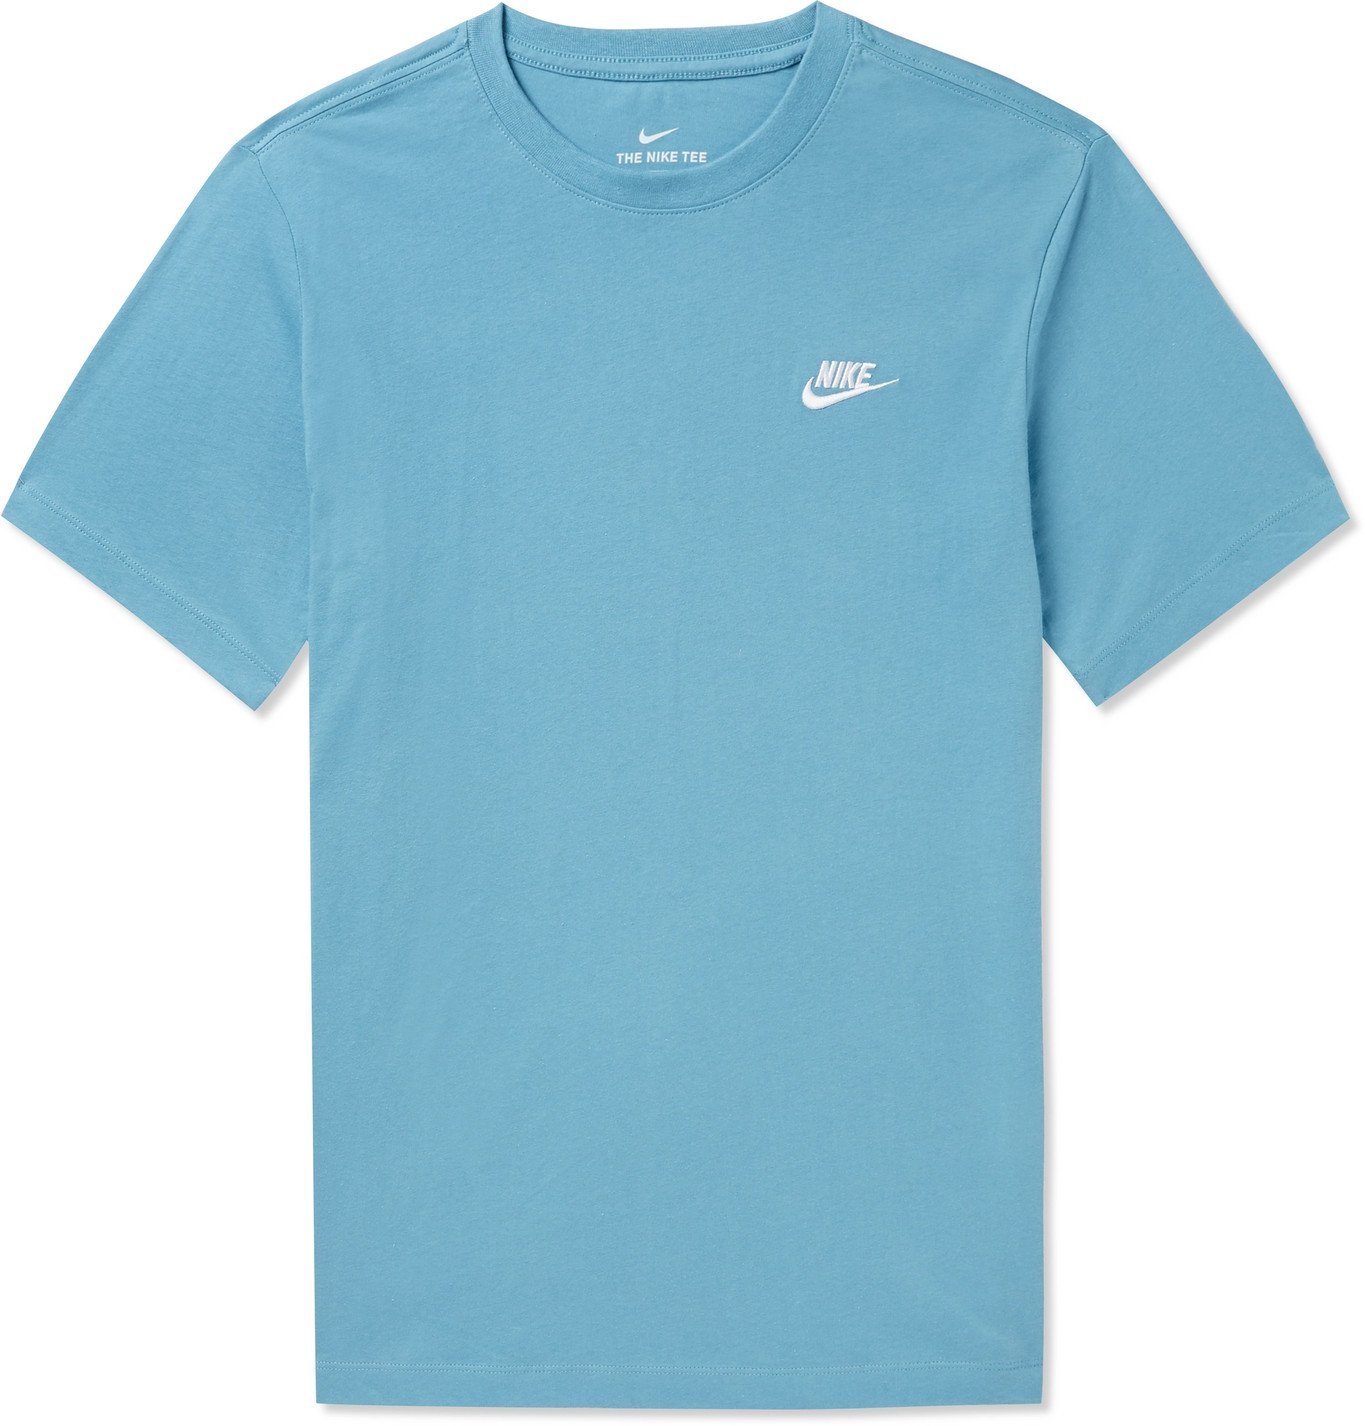 Nike - Logo-Embroidered Cotton-Jersey T-Shirt - Blue Nike